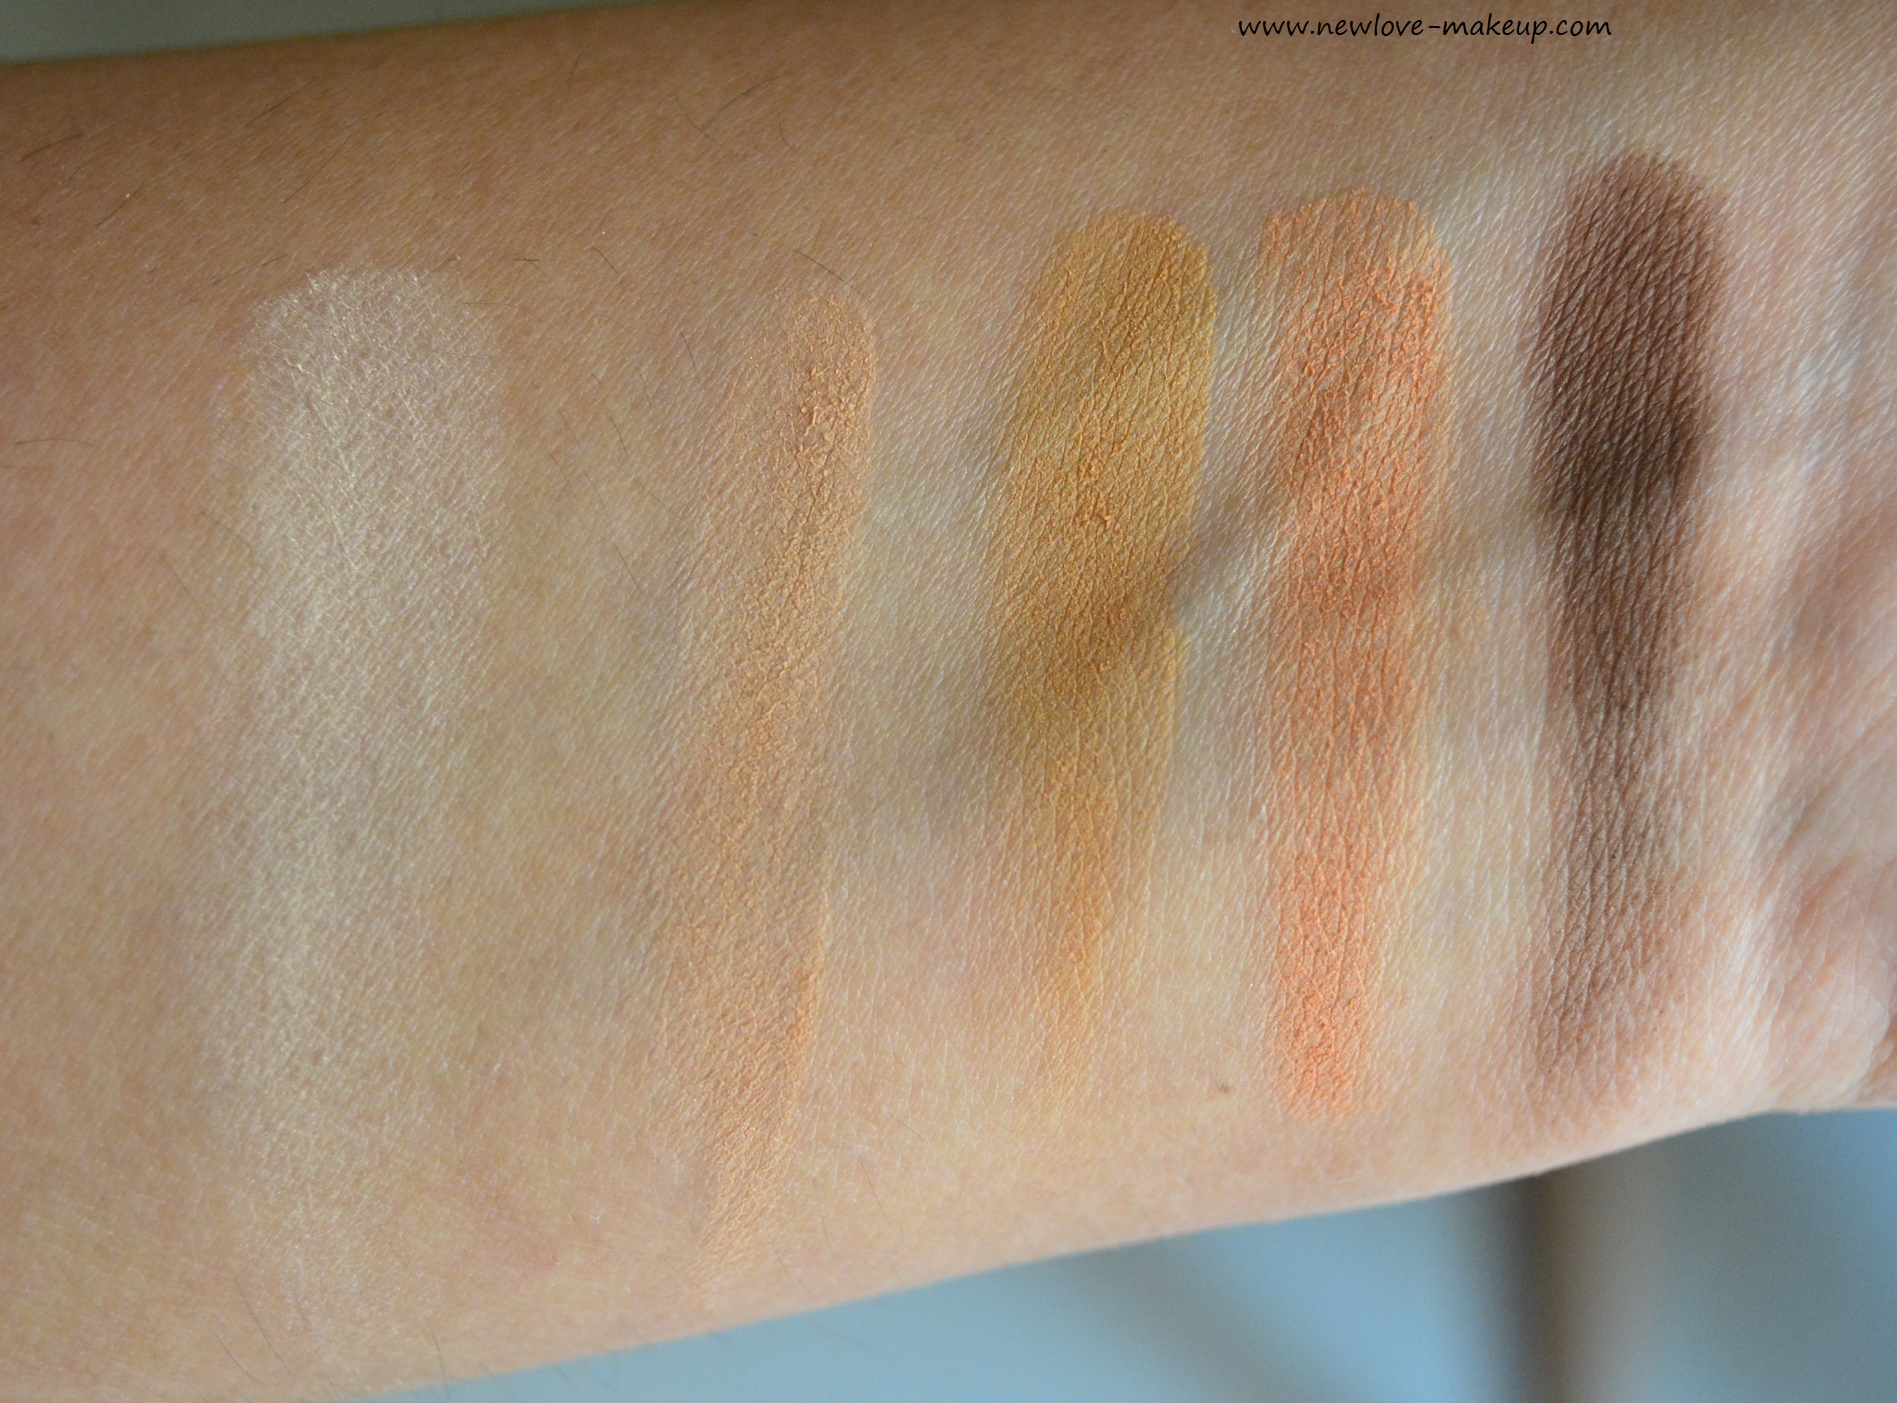 #GigixMaybelline Eyeshadow Palettes, Liquid Strobes, Tinted Primers Review/Swatches